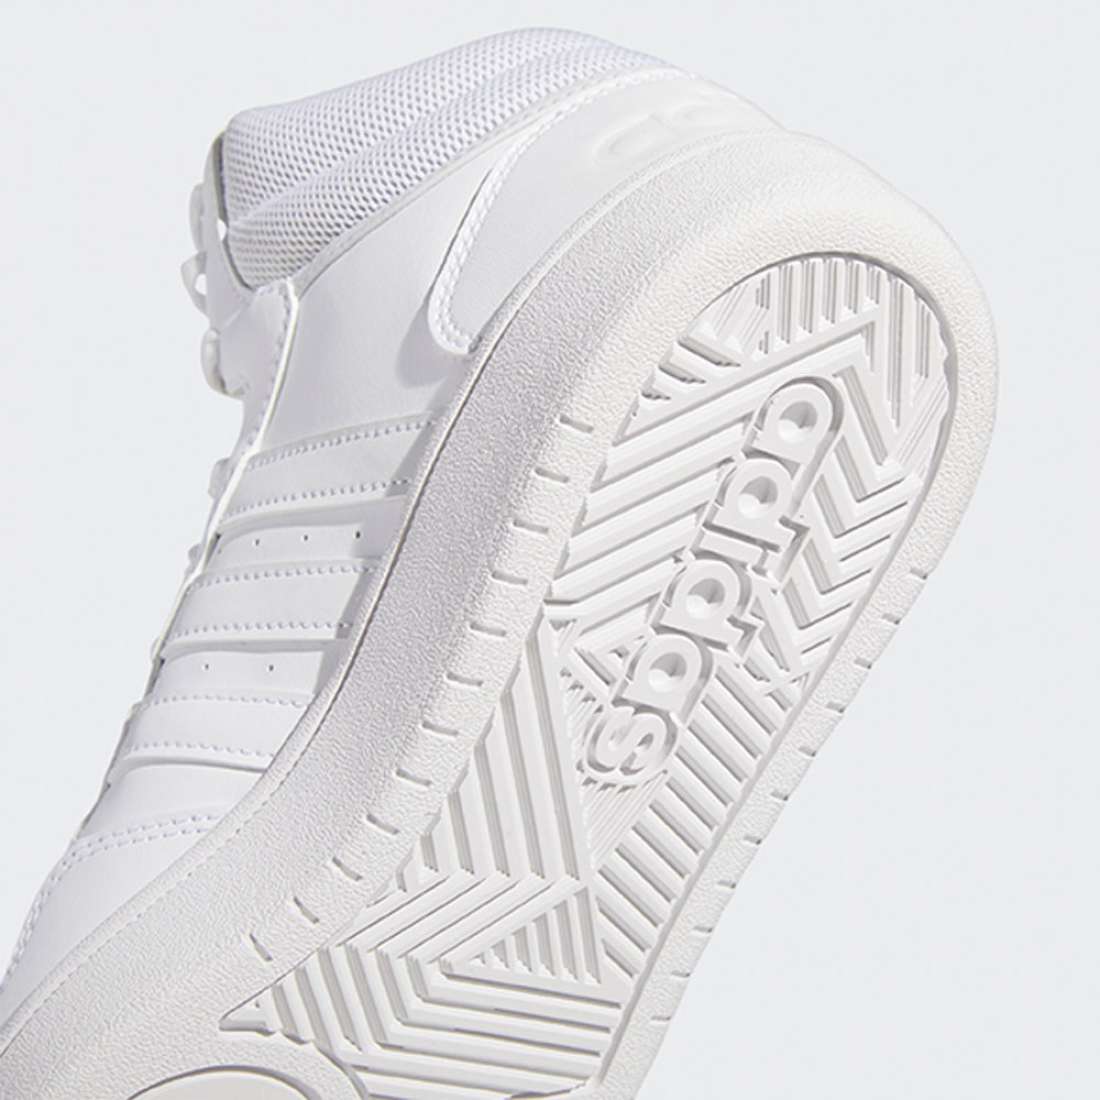 ADIDAS HOOPS 3.0 MID FTWWHT/FTWWHT/DSHGRY